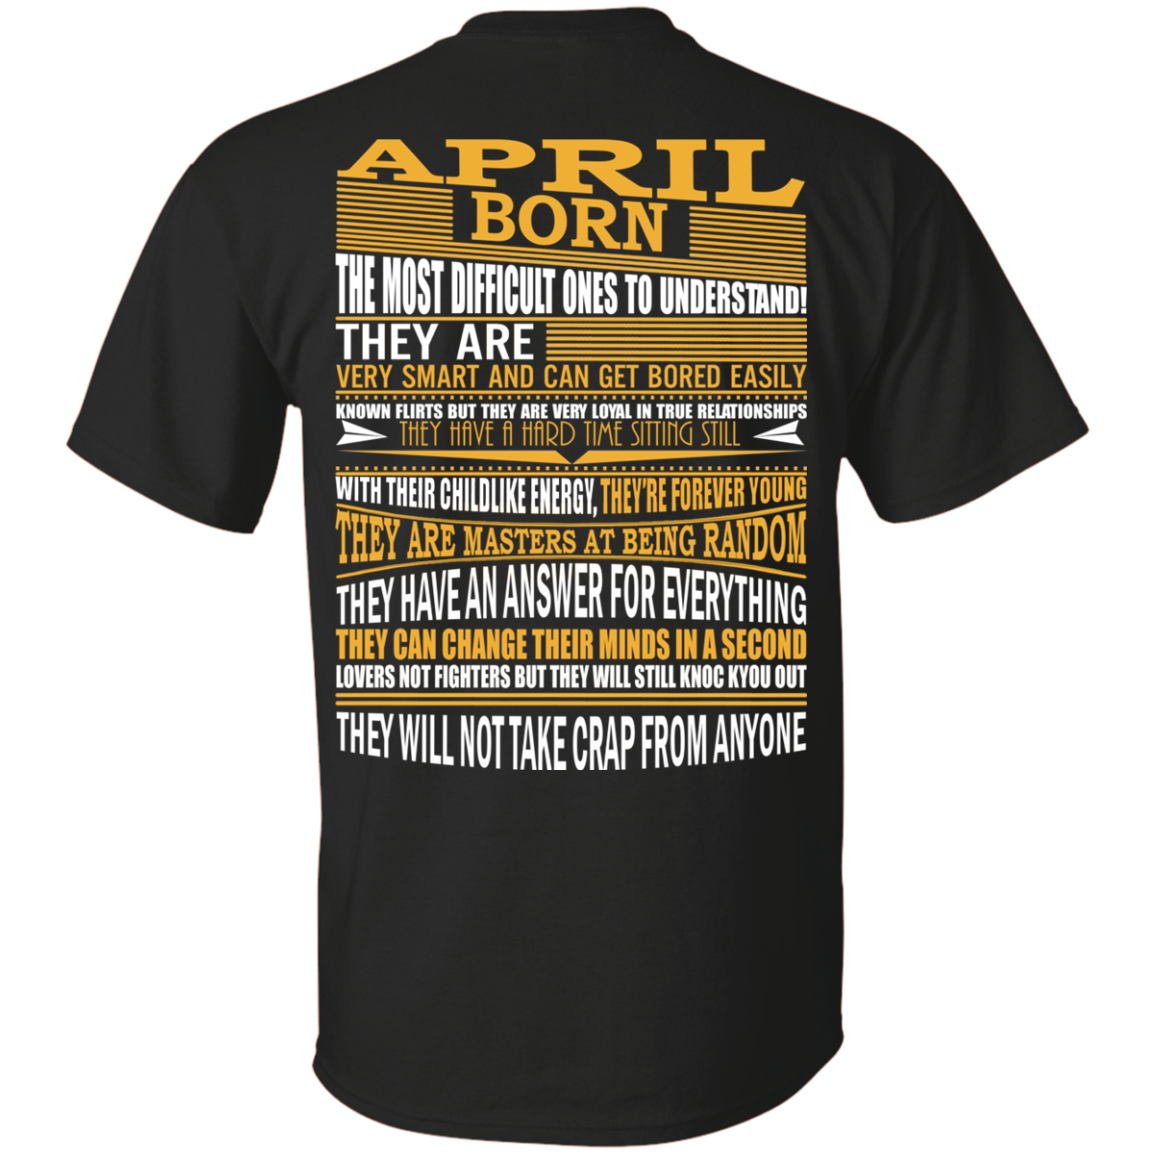 April Born - The Most Difficult Ones To Understand Shirt - Back Design